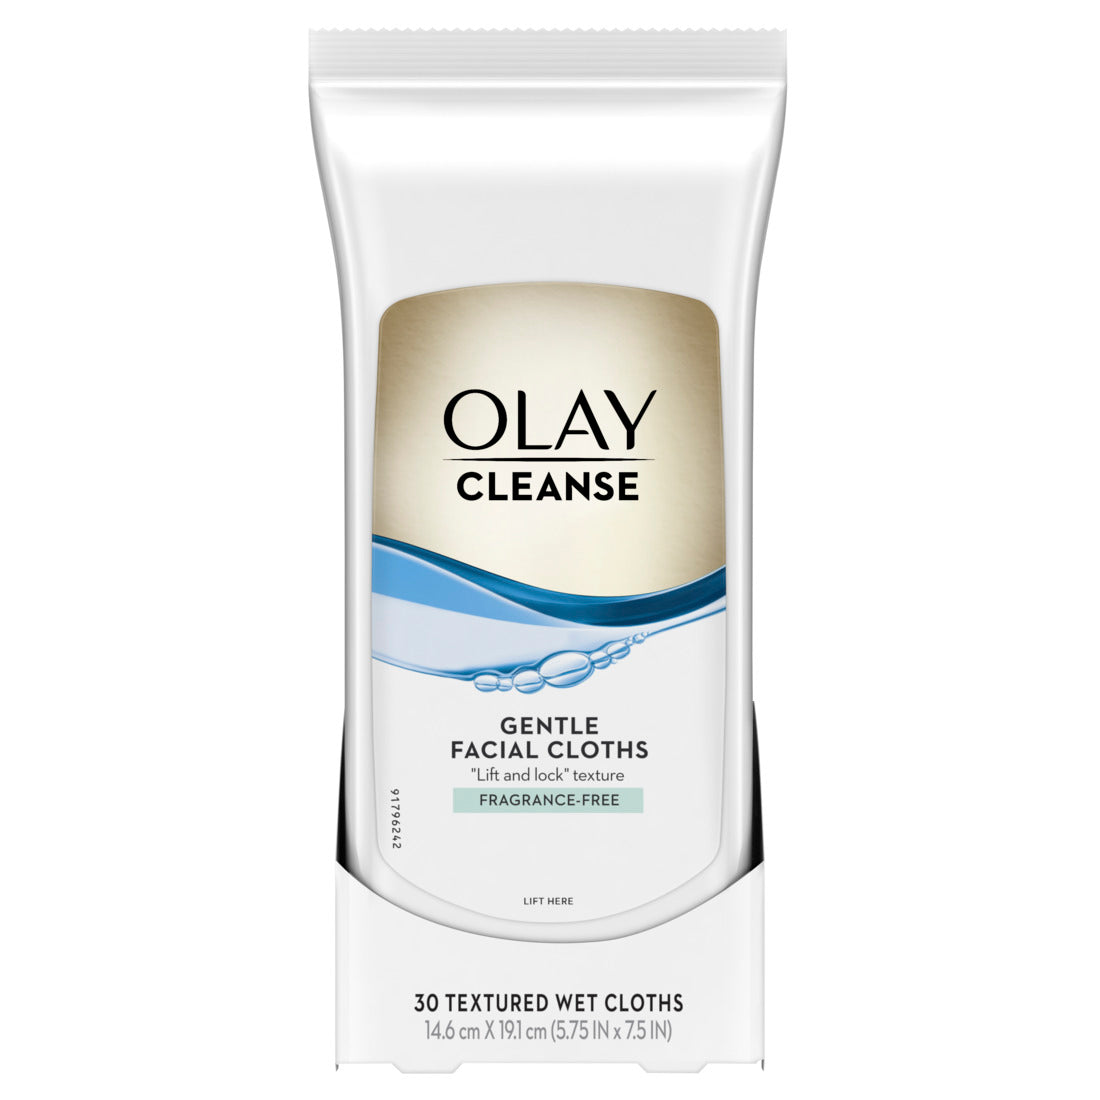 Olay Clense Gentle Facial Cloths Fragrance Free - 30ct/12pk